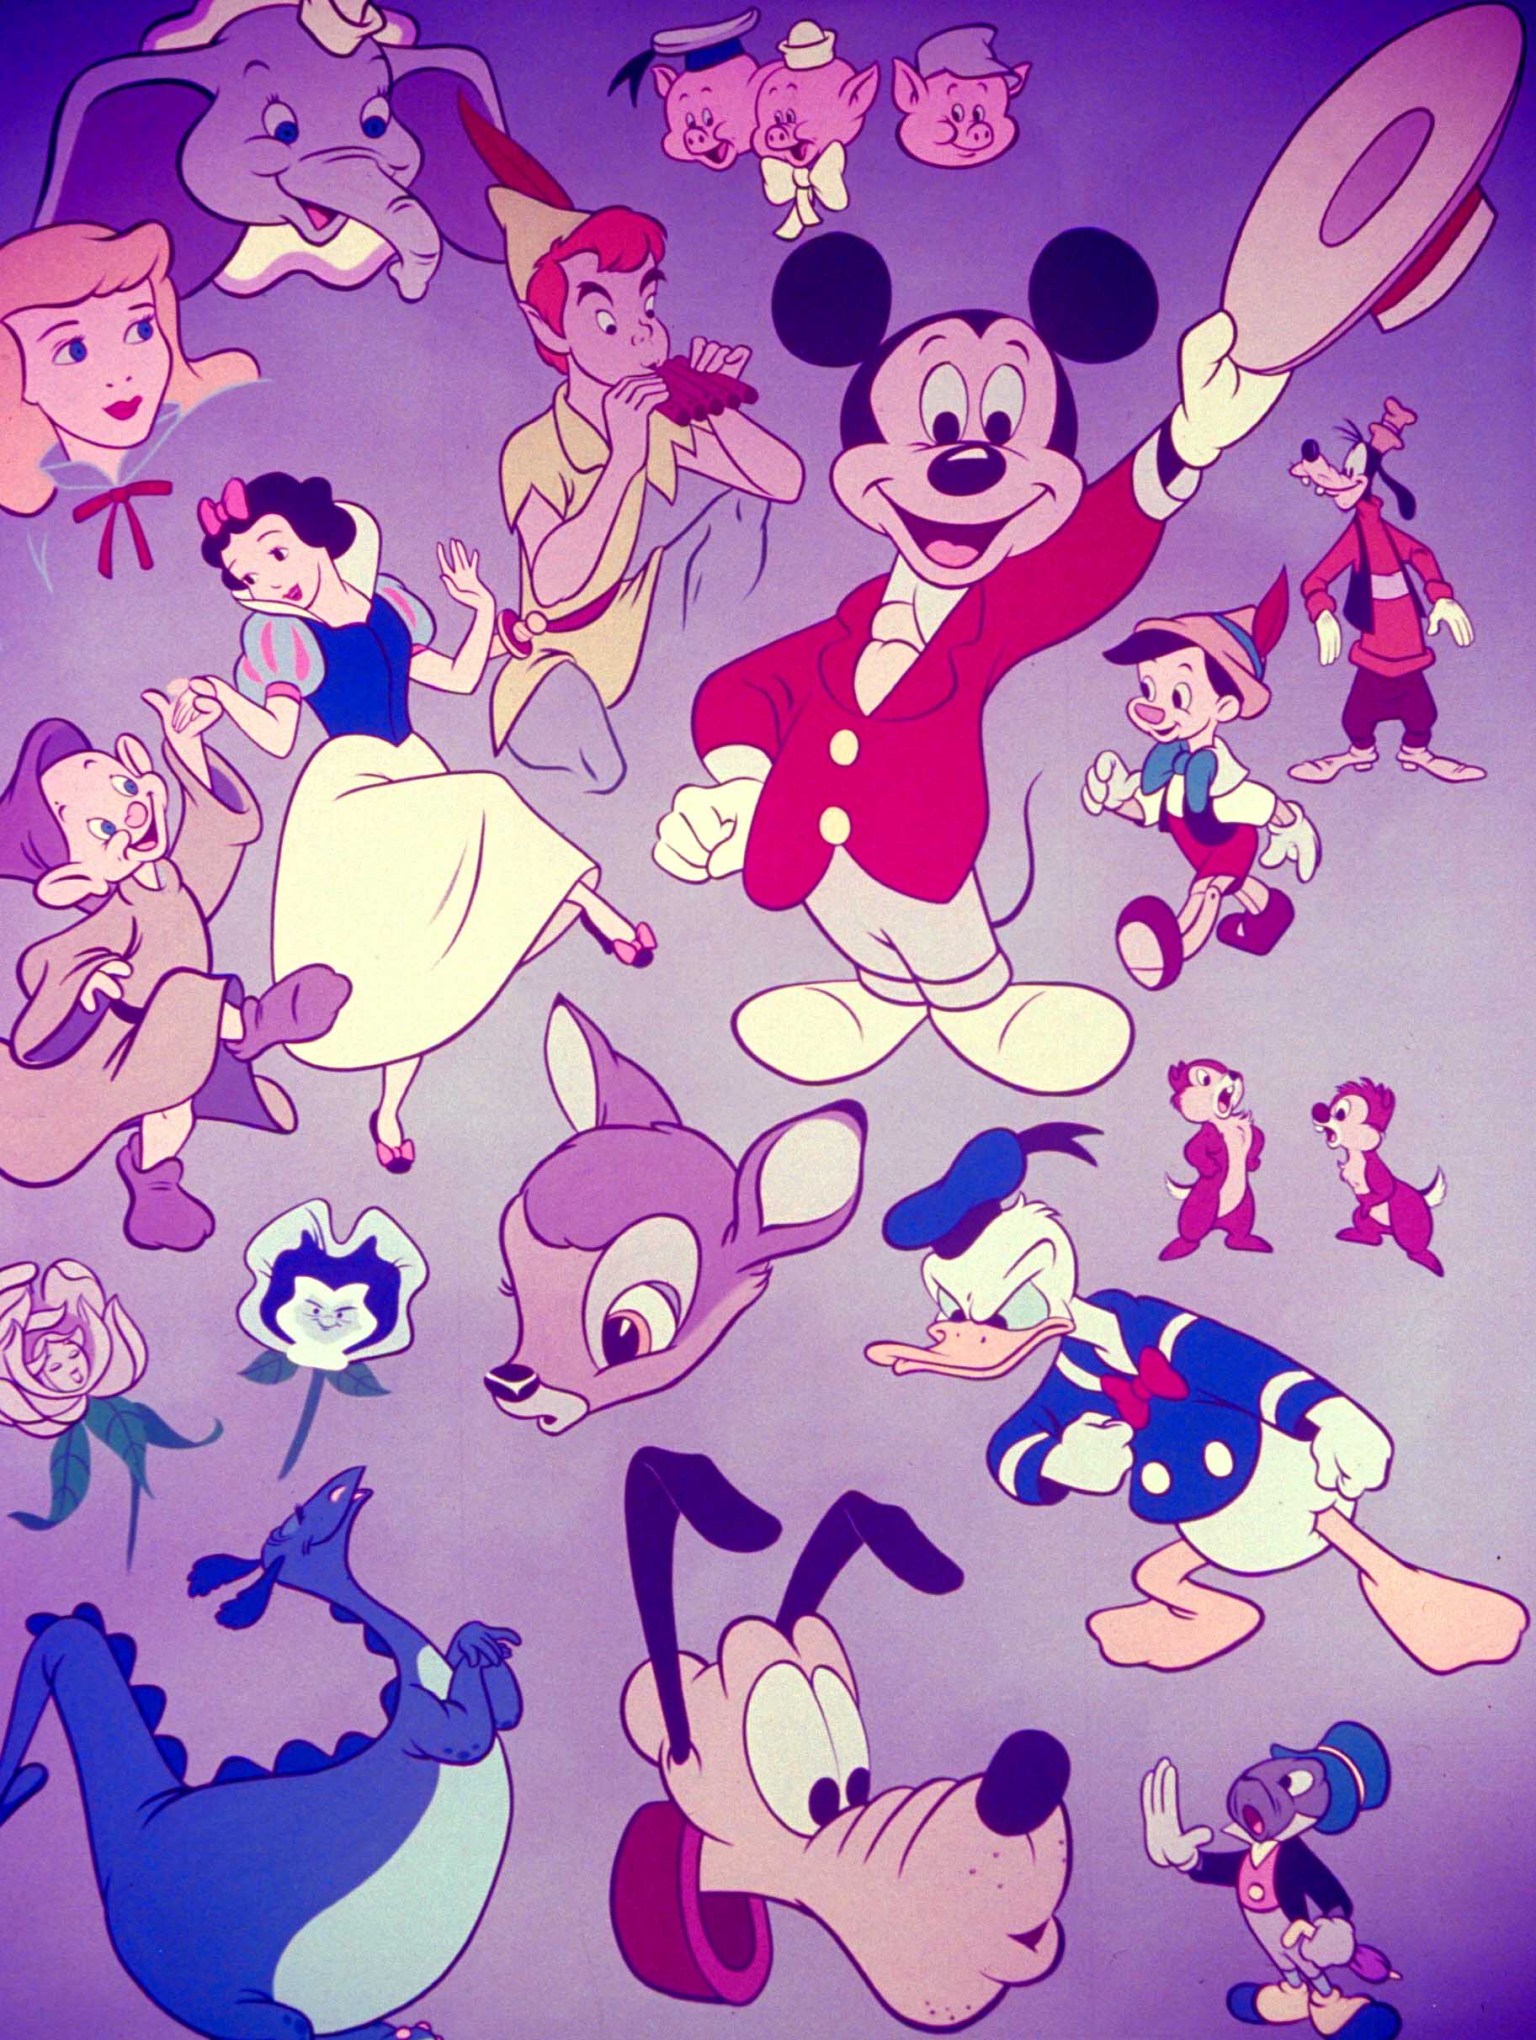 Tales As Old As Time: 11 Inspiring Disney Quotes To Bring Out Your 